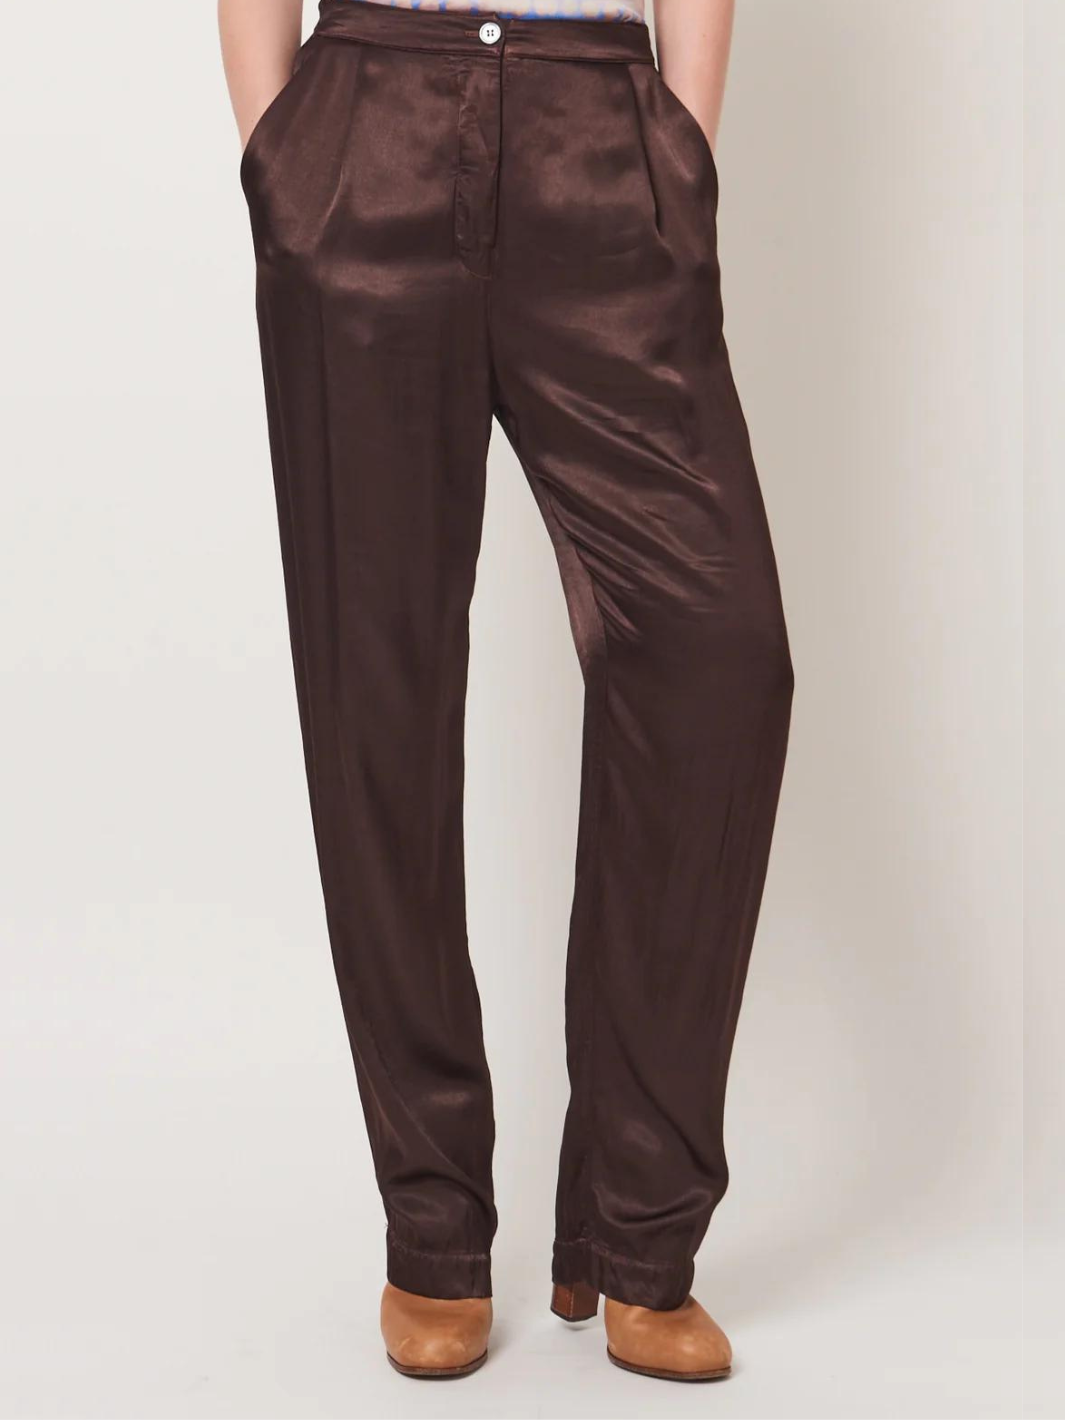 BIANCA PANT IN CHOCLATE - Romi Boutique